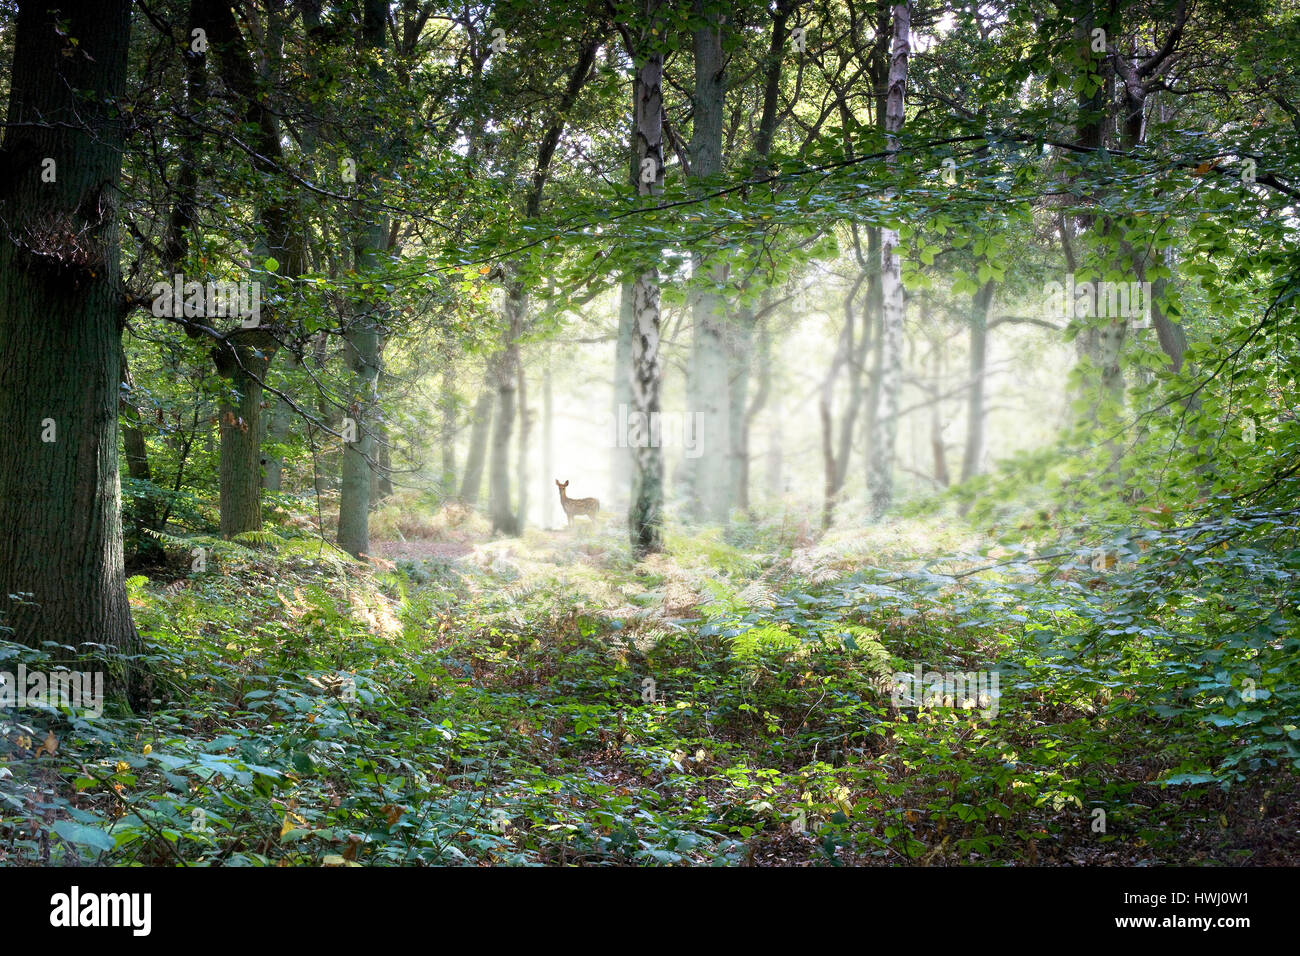 Misty English woodland with deer Stock Photo